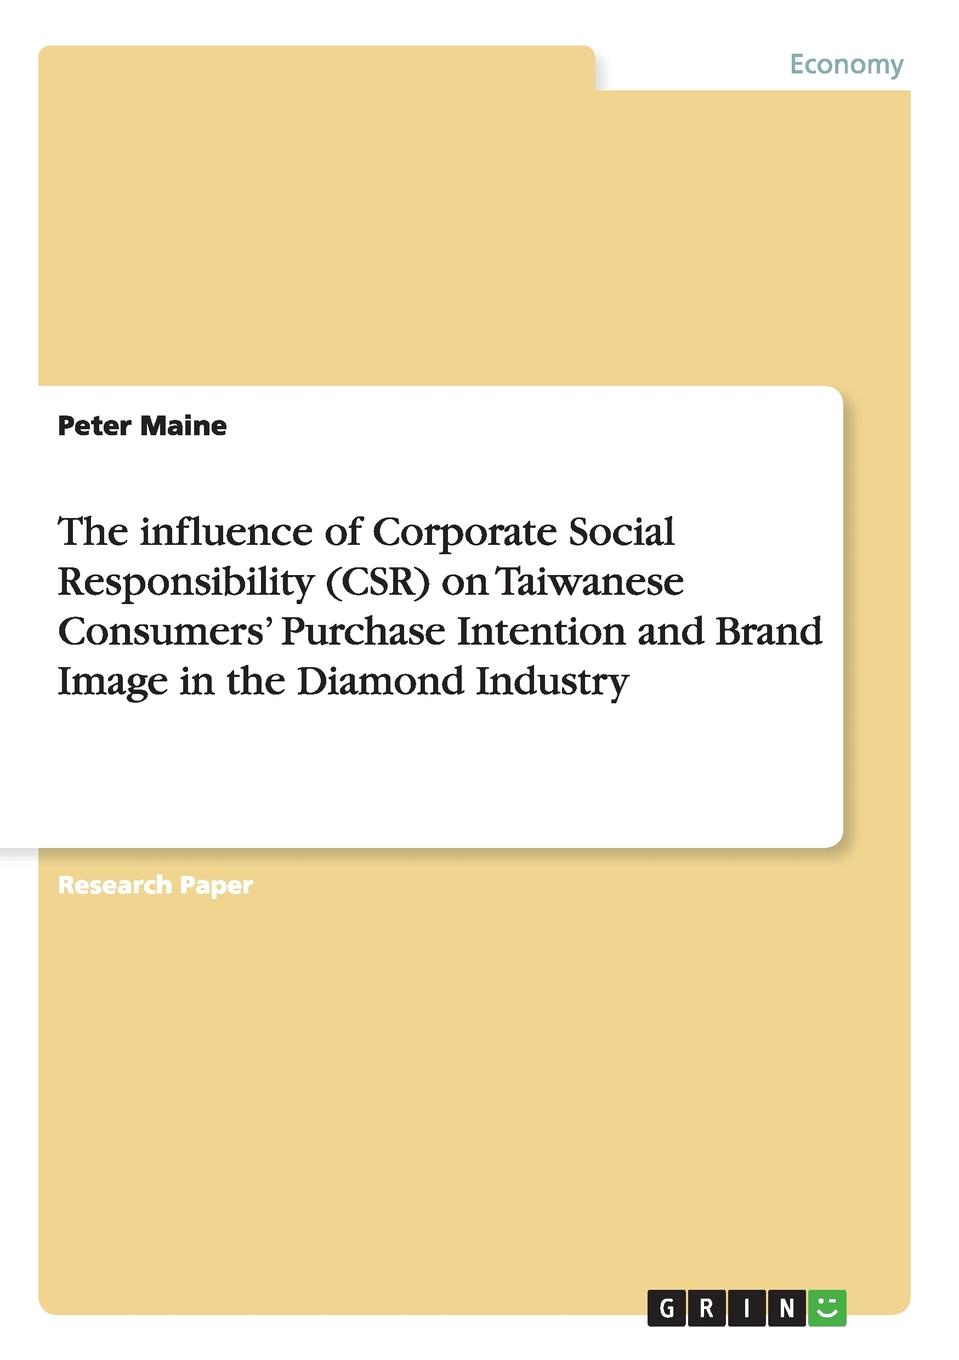 Peter Maine The influence of Corporate Social Responsibility (CSR) on Taiwanese Consumers. Purchase Intention and Brand Image in the Diamond Industry